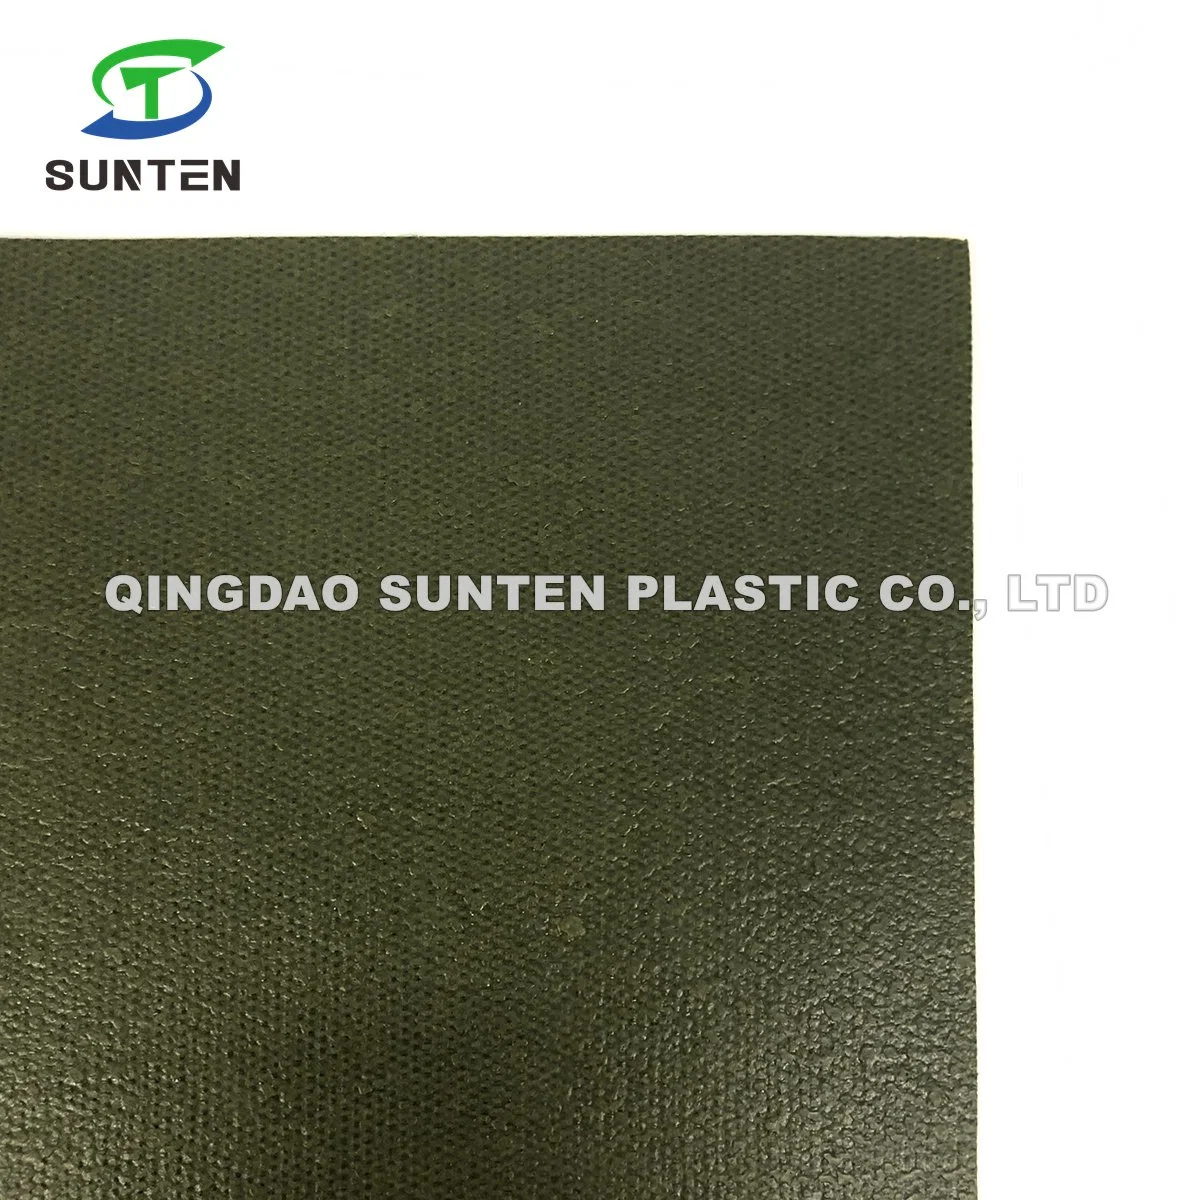 Waterproof/UV Resistant/Flame Retardant Plastic/Vinyl/PVC Coated/Laminated Tarp for Truck & Lorry Cover, Tent, Awnings, Pond/Pool Liner for Philippines